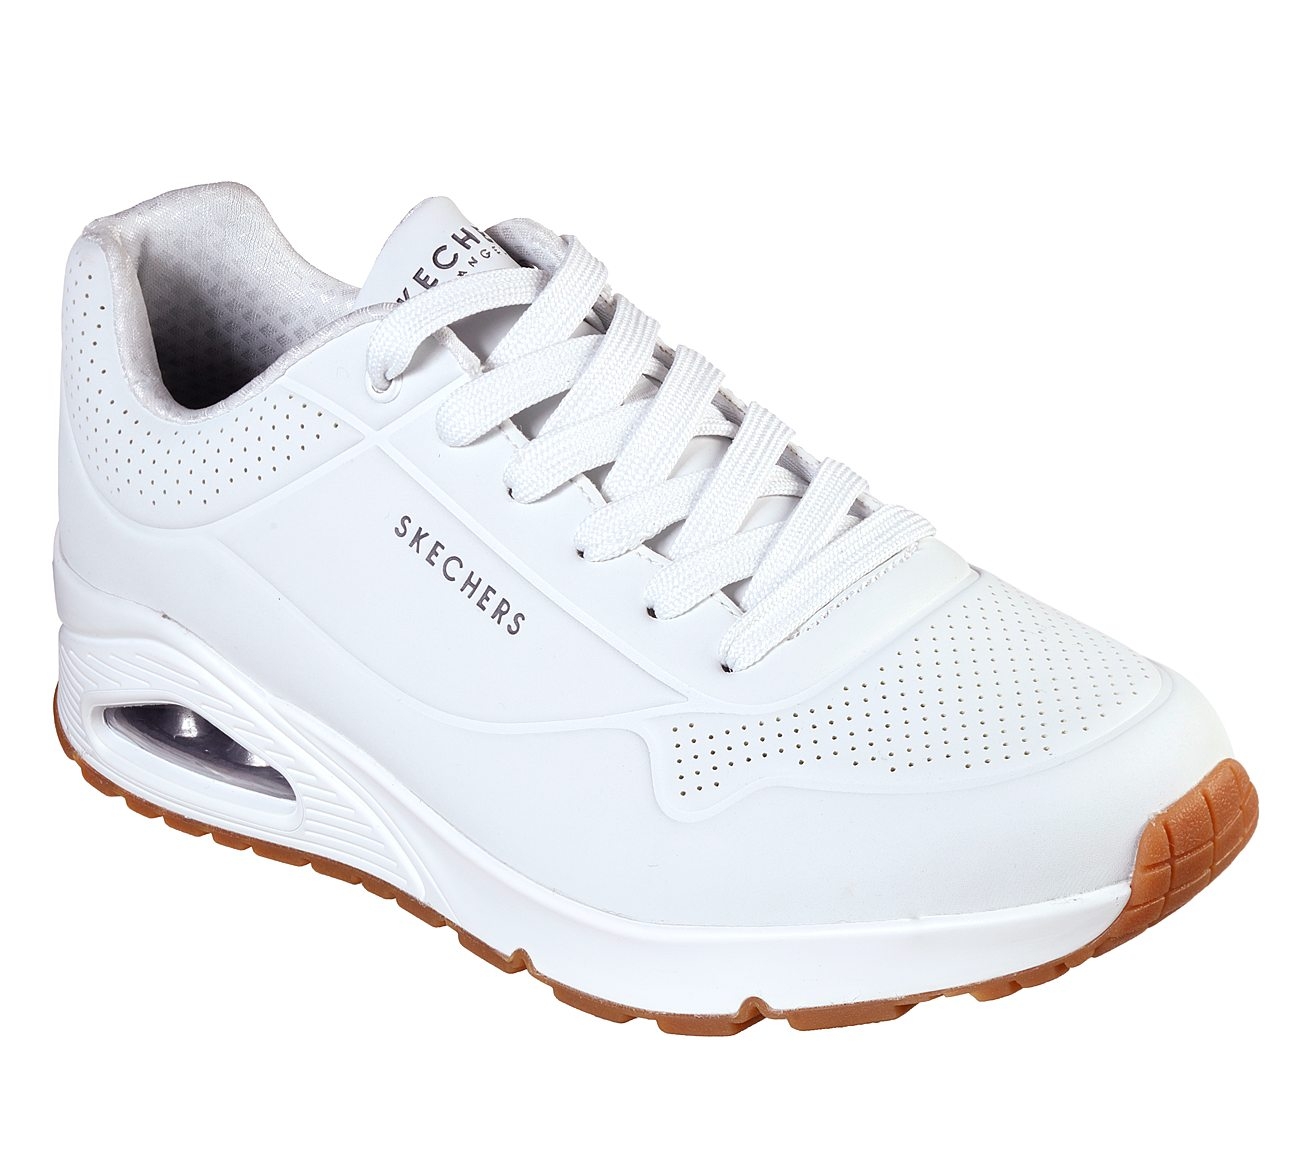 Skechers | SKECHERS UNO - STAND ON AIR LIFESTYLE SHOE